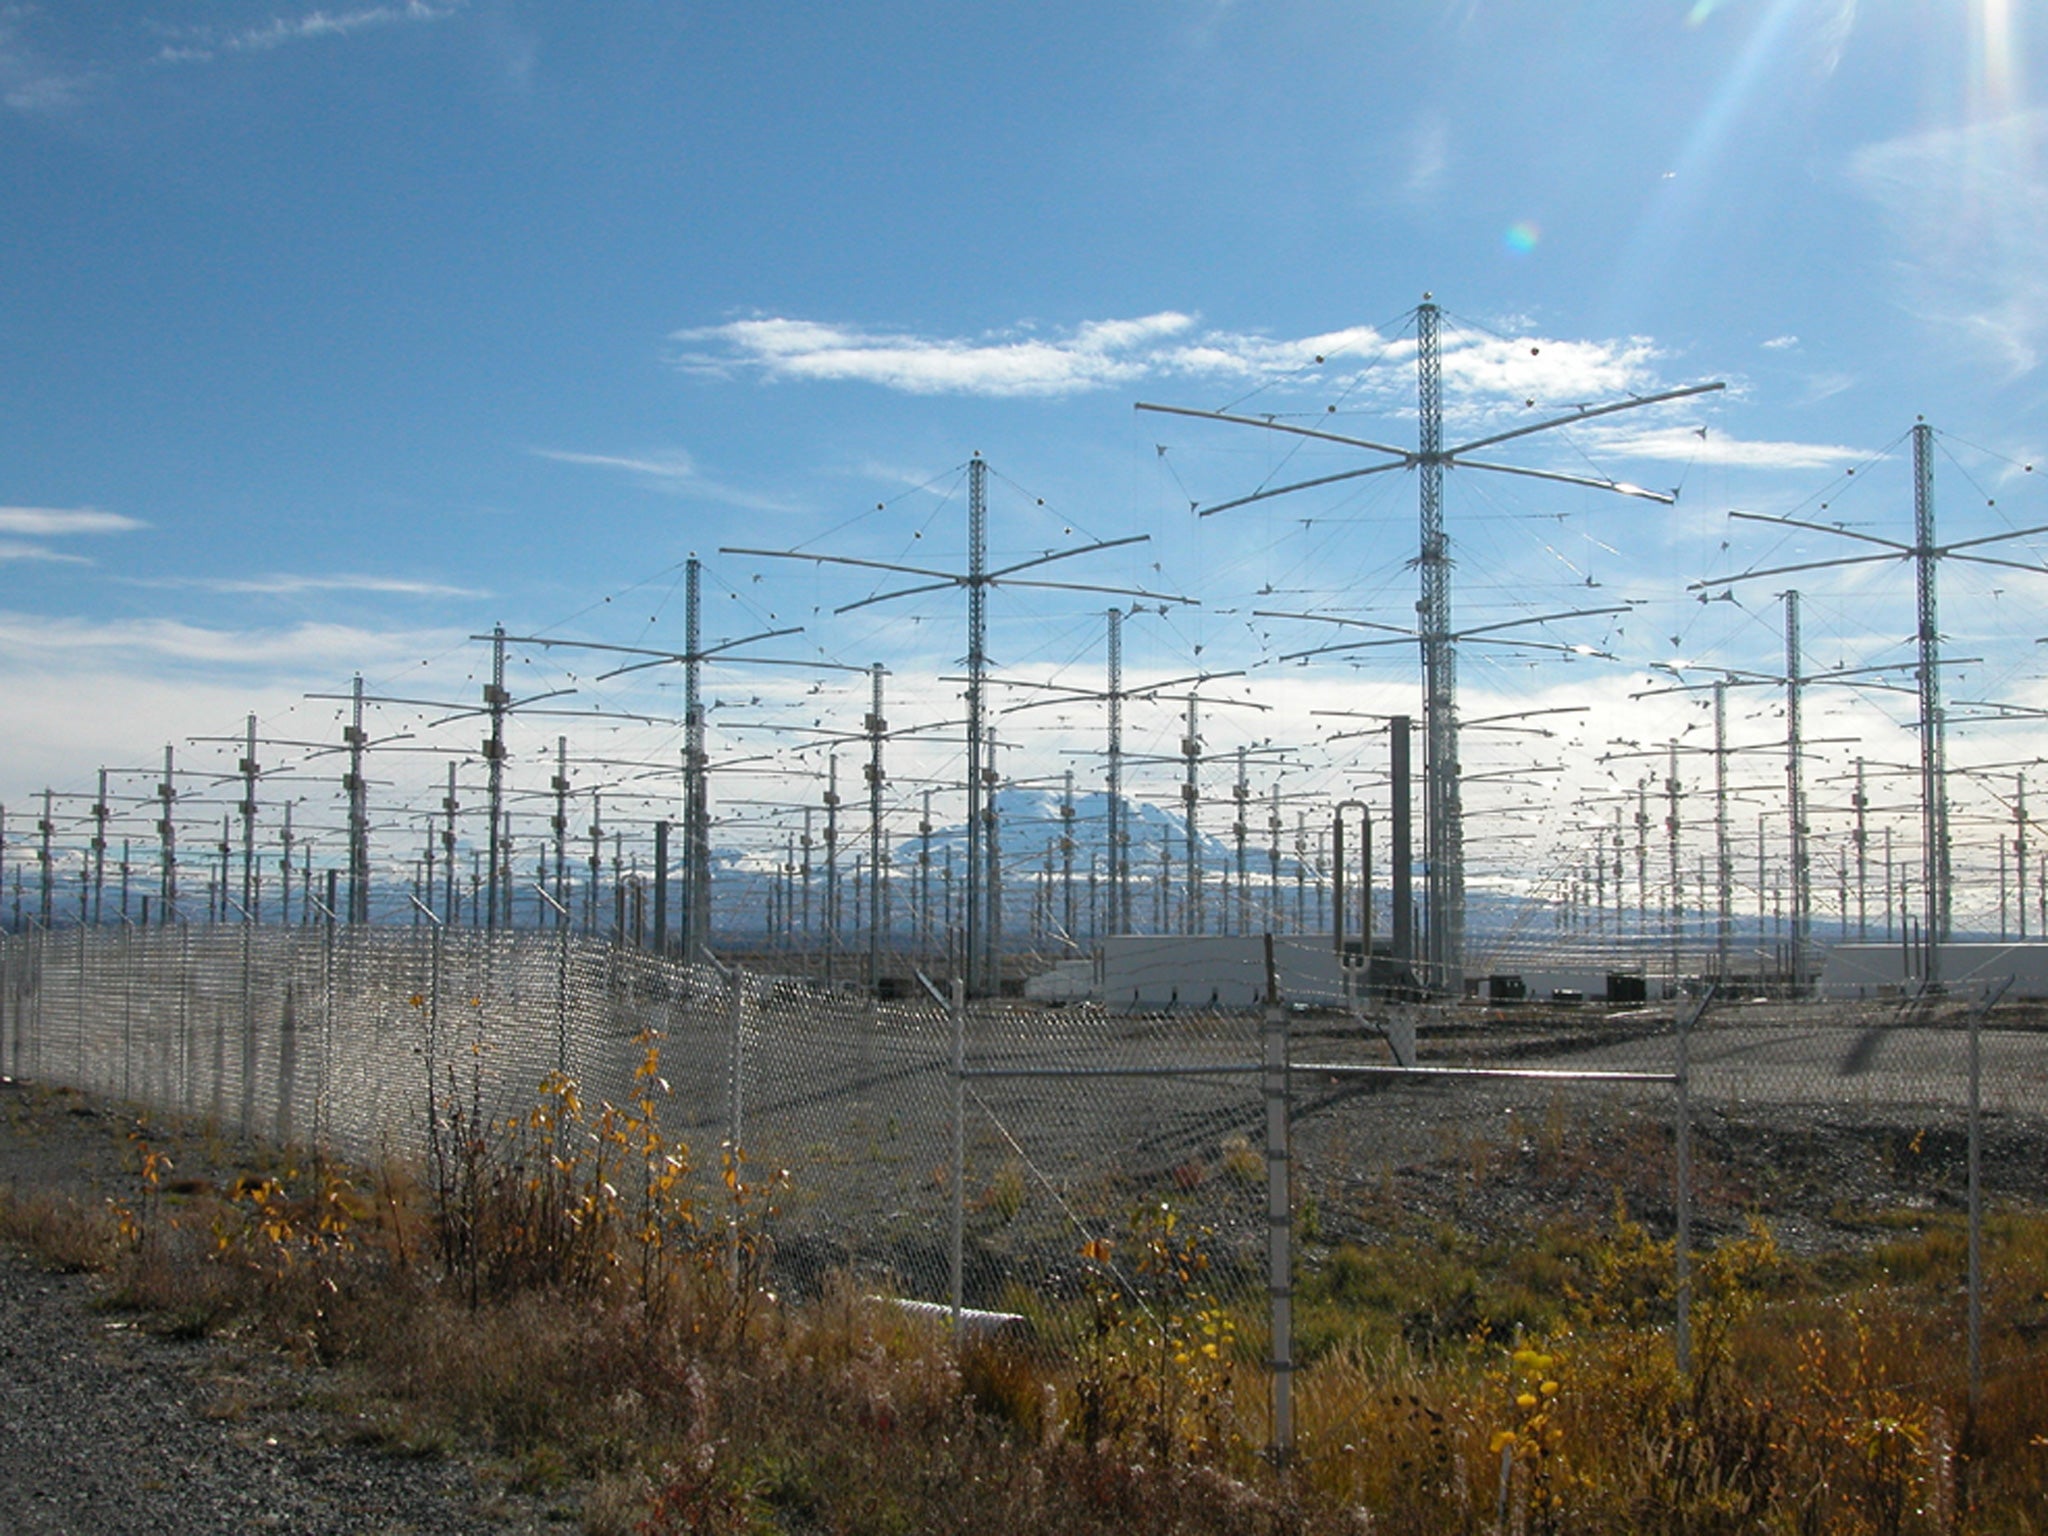 HAARP will shut down after a final research project in mid-June.